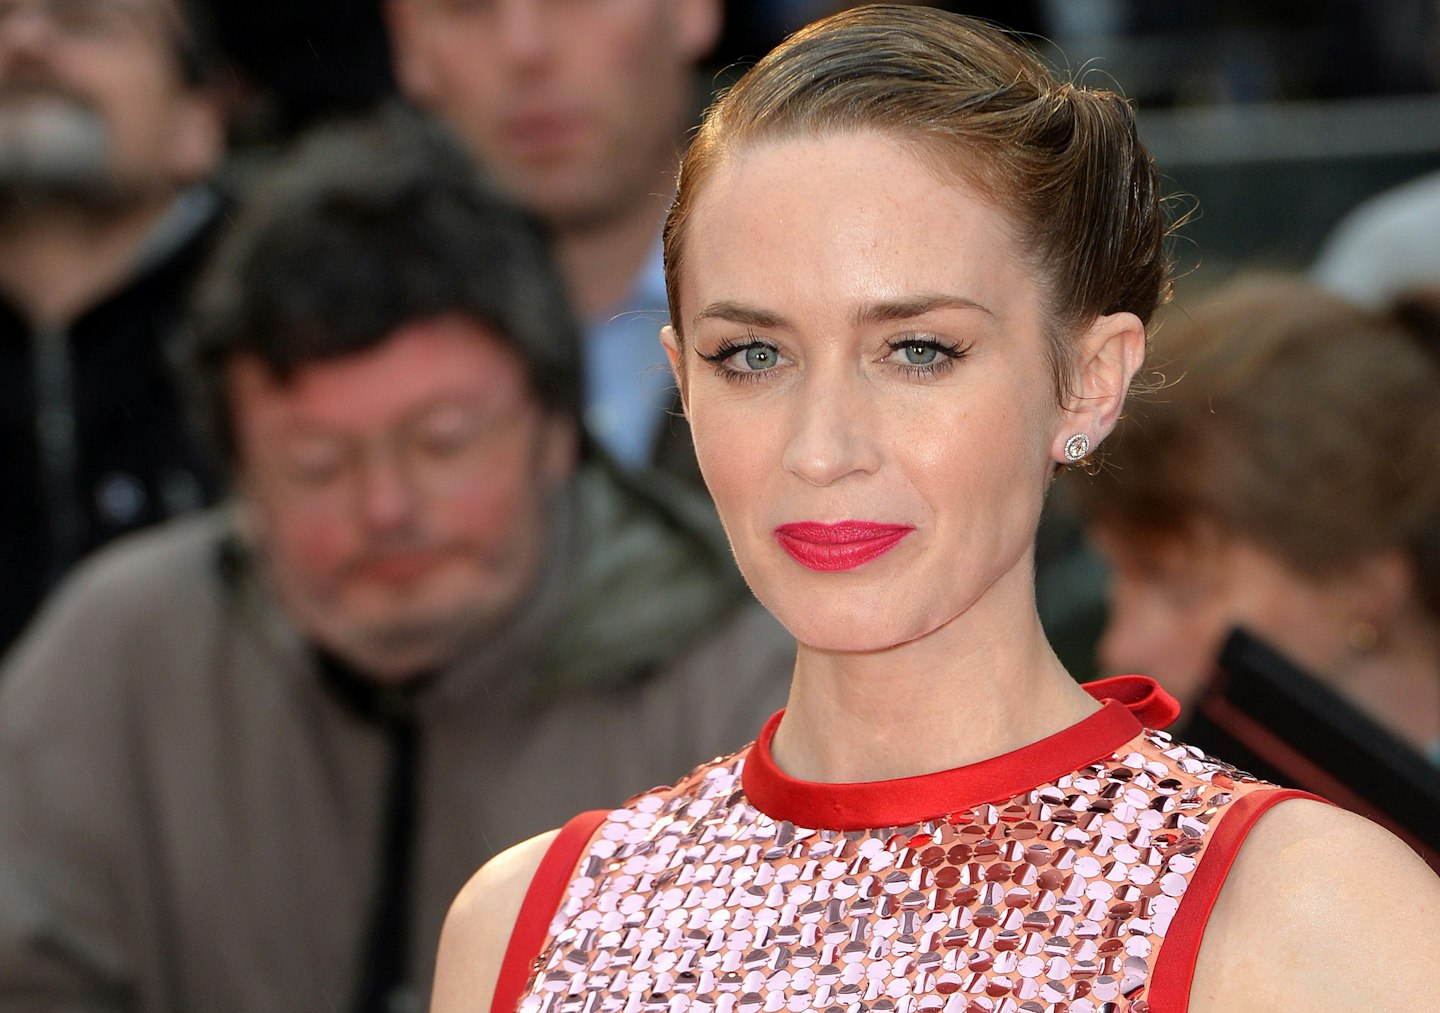 Emily Blunt at the Sicario premiere